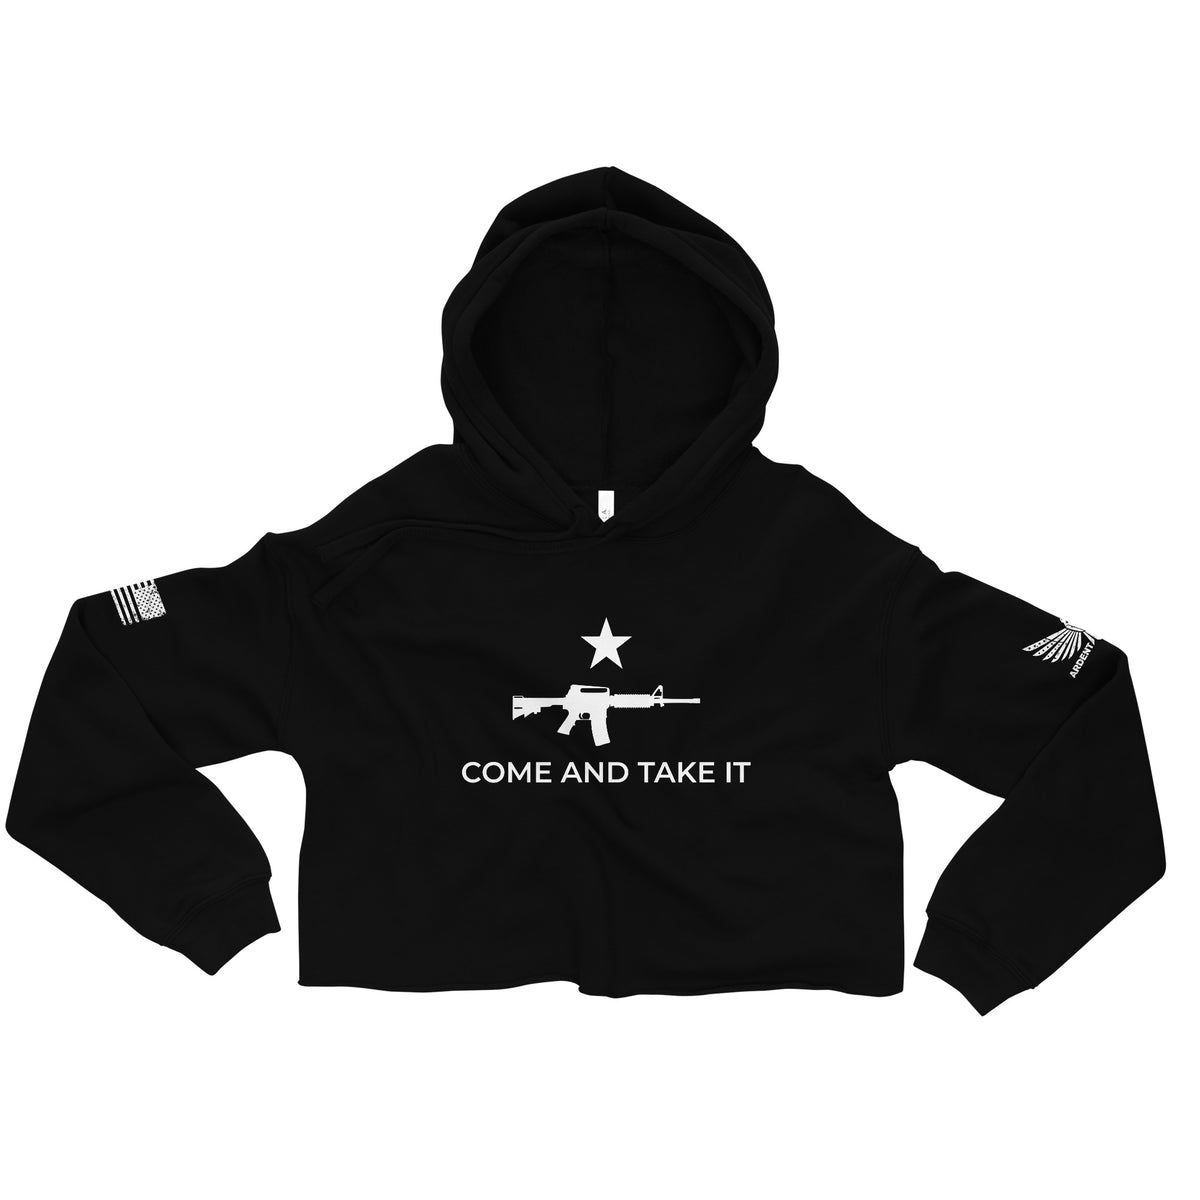 Come And Take It Crop Hoodie-Crop Hoodie-S-Ardent Patriot Apparel Co.